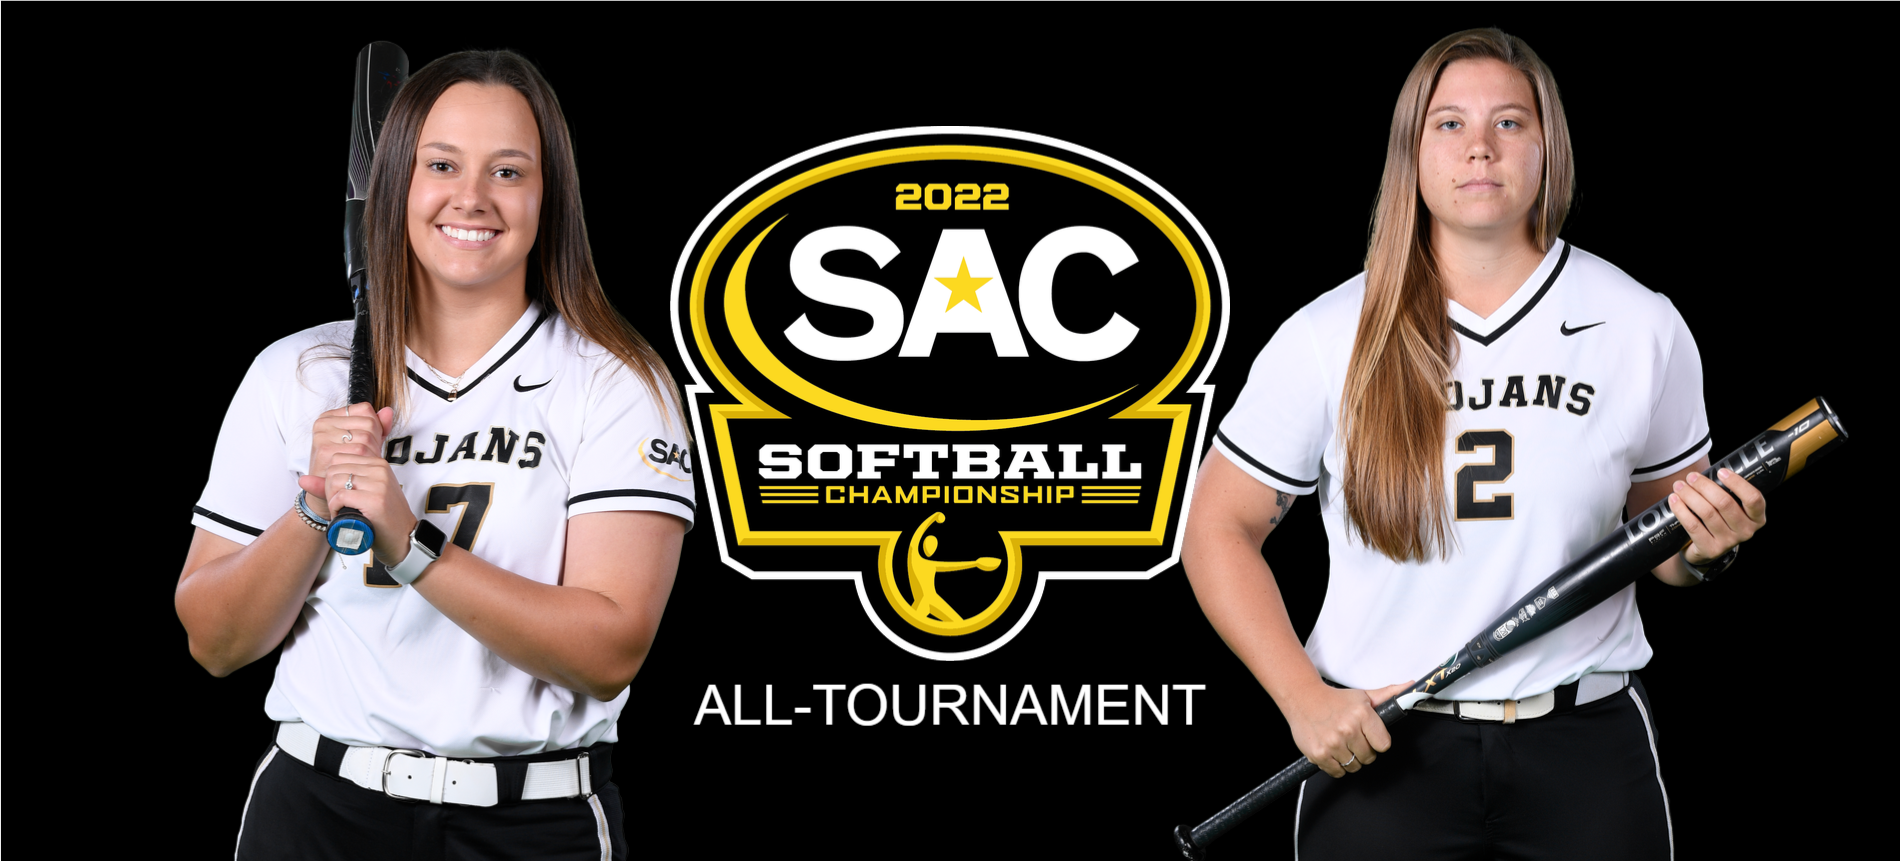 Charter and Carpenter Earn South Atlantic Conference All-Tournament